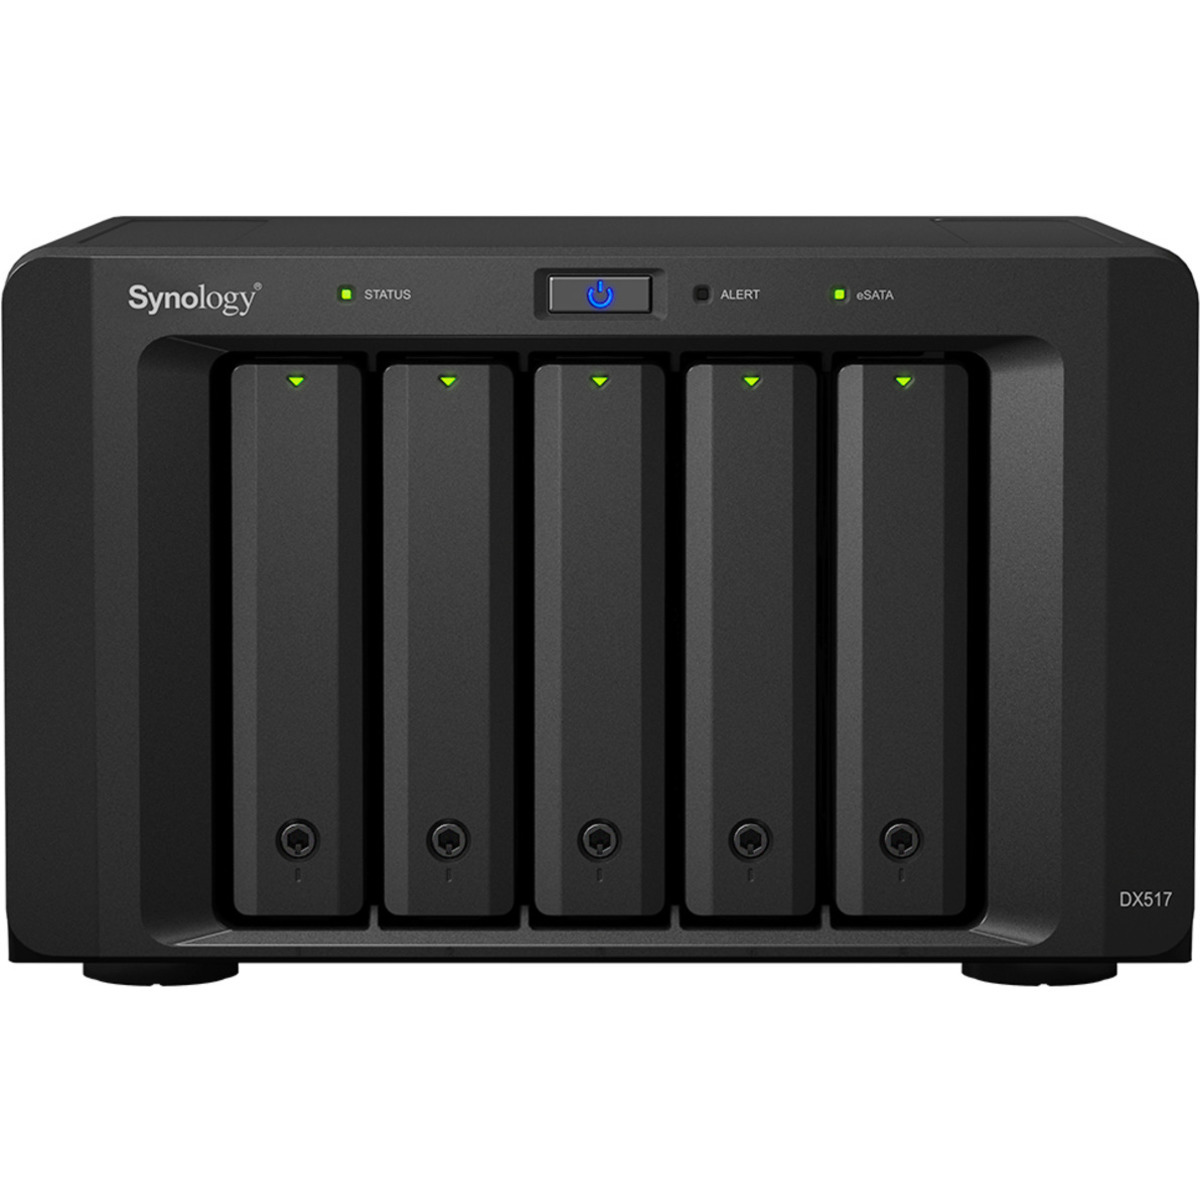 Synology DX517 External Expansion Drive 30tb 5-Bay Desktop Multimedia / Power User / Business Expansion Enclosure 3x10tb Western Digital Red Plus WD101EFBX 3.5 7200rpm SATA 6Gb/s HDD NAS Class Drives Installed - Burn-In Tested DX517 External Expansion Drive